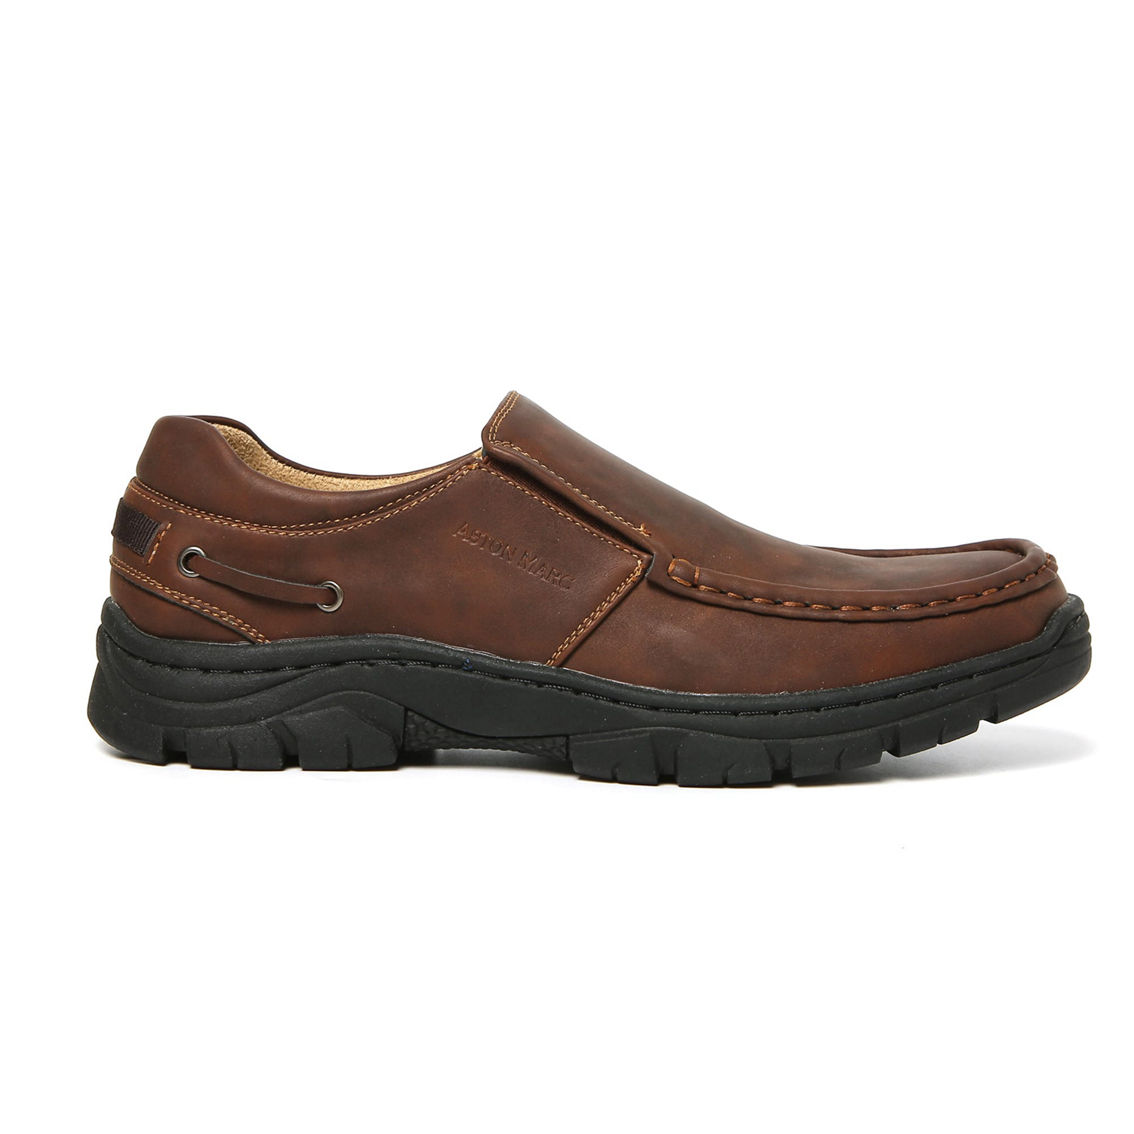 ASTON MARC MEN'S SLIP ON COMFORT CASUAL SHOES - Image 2 of 5